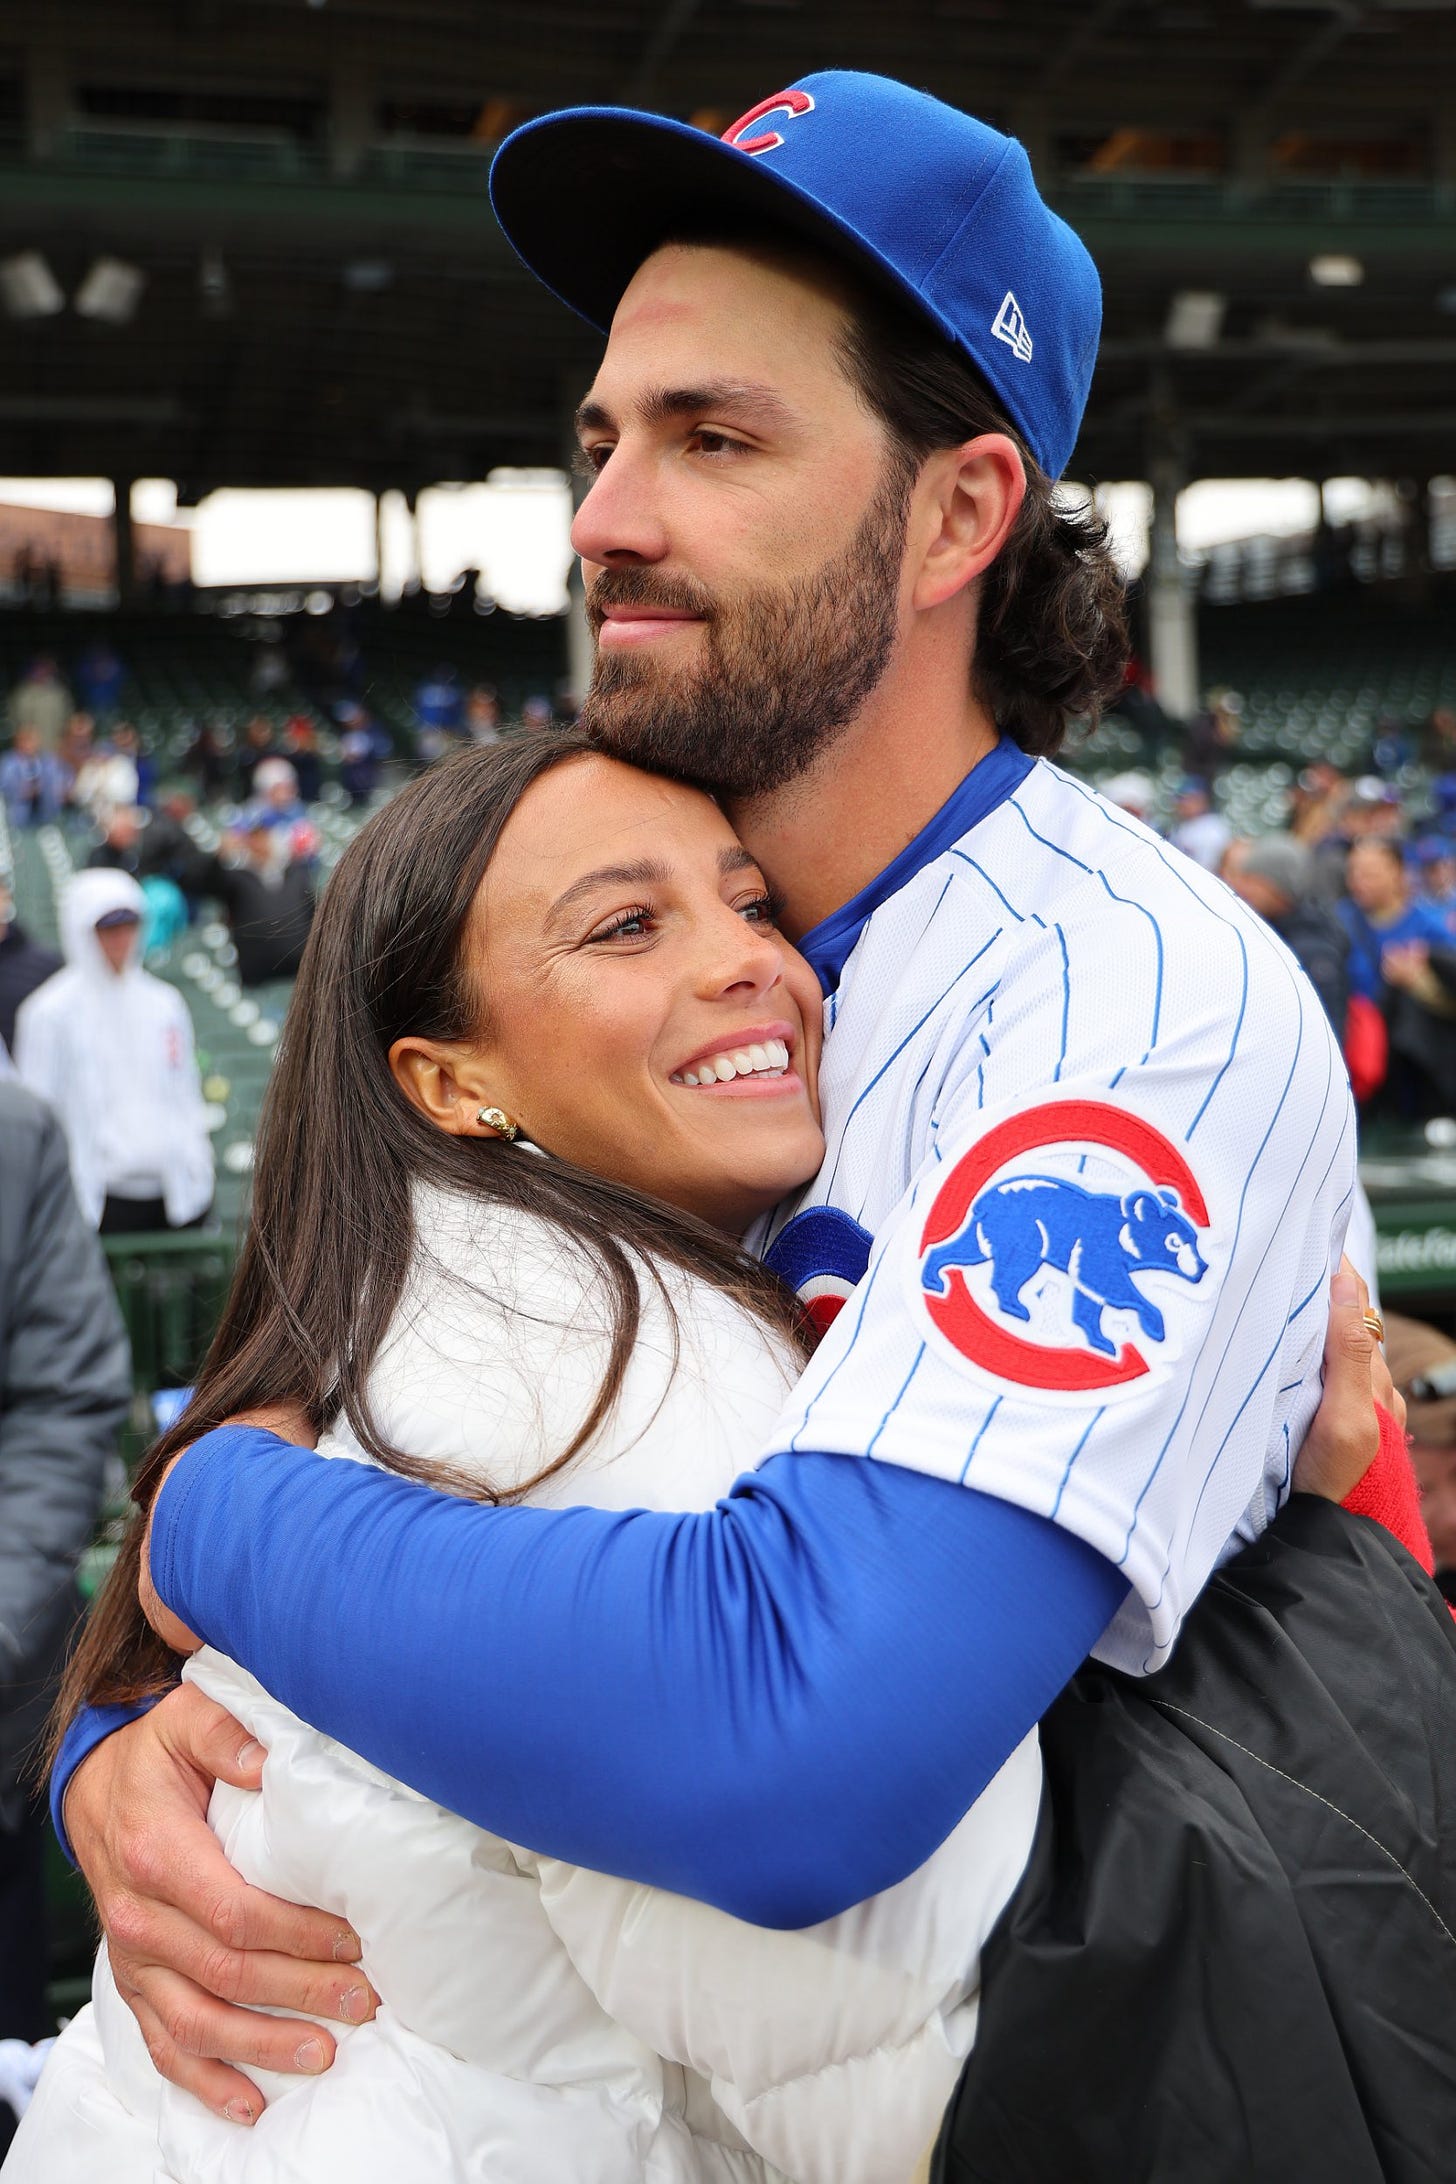 Dansby Swanson of the Chicago Cubs embraces his wife, Mallory Pugh Swanson, after winning the game against the Milwaukee Brewers at Wrigley Field in Chicago, Illinois, on March 30, 2023